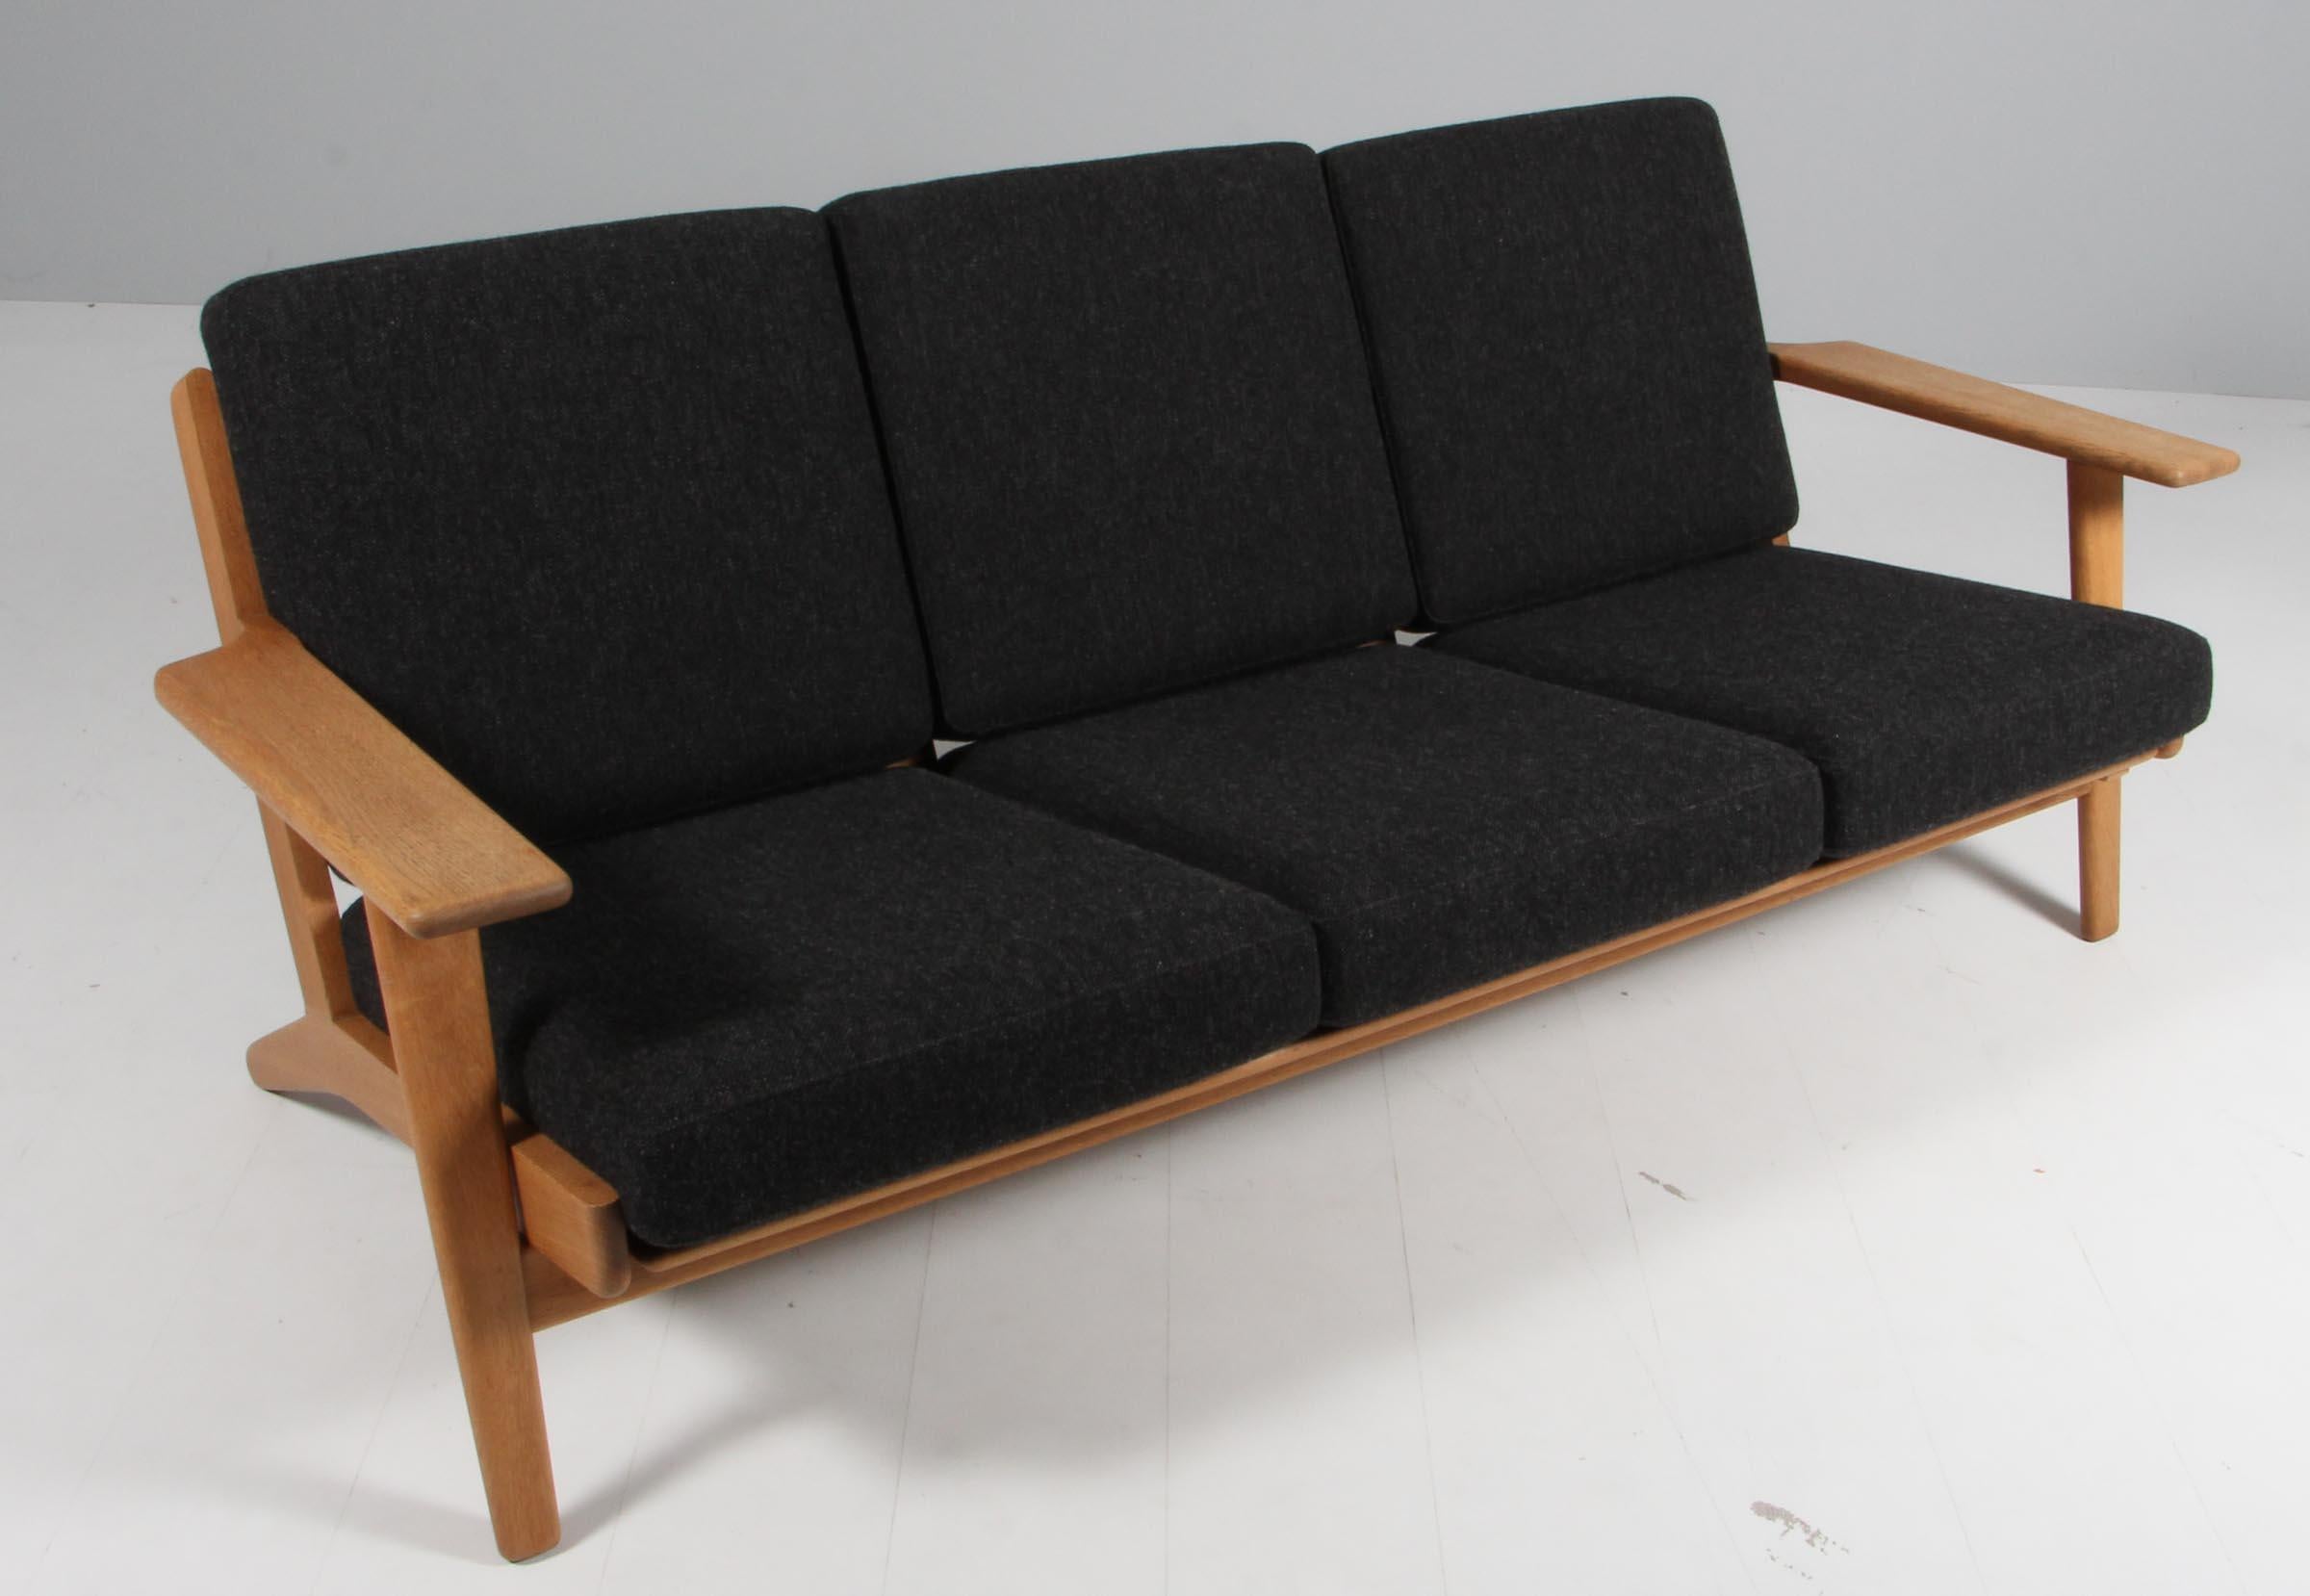 Hans J. Wegner three-seat sofa made of solid soap treated oak.

New upholstered with Hallingdal 180 from Kvadrat

Model 290, made by GETAMA.

